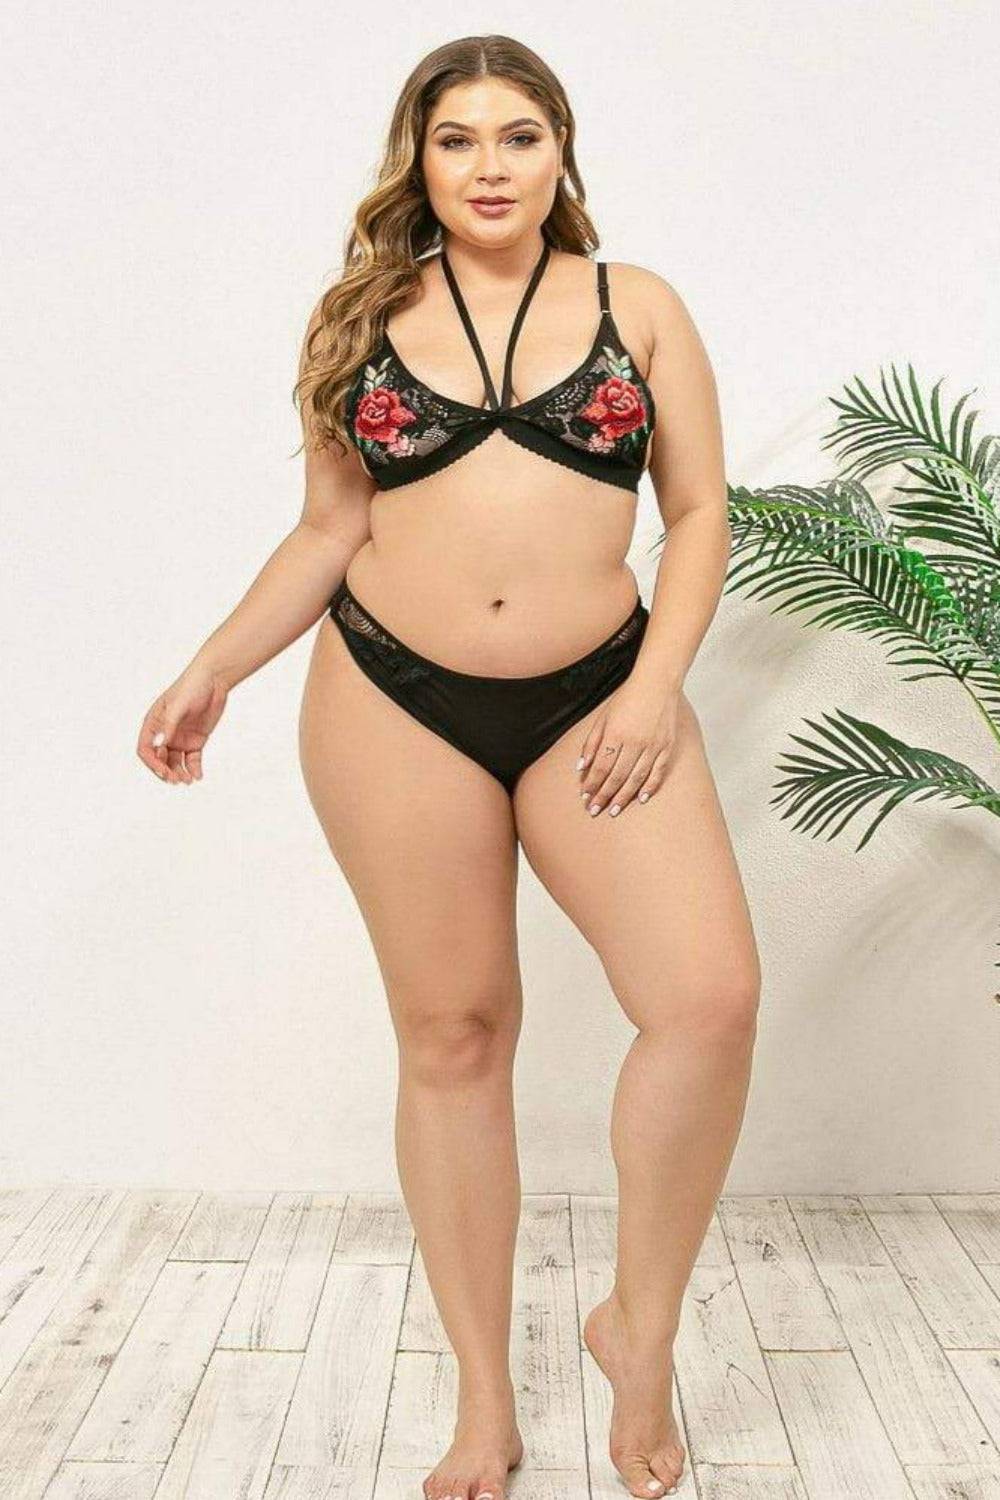 Floral Lace Bikini Air Bra & Panties Set Back With Low Waisted Thong Sexy See  Through Lingerie For Women From Bikini_designer, $14.8